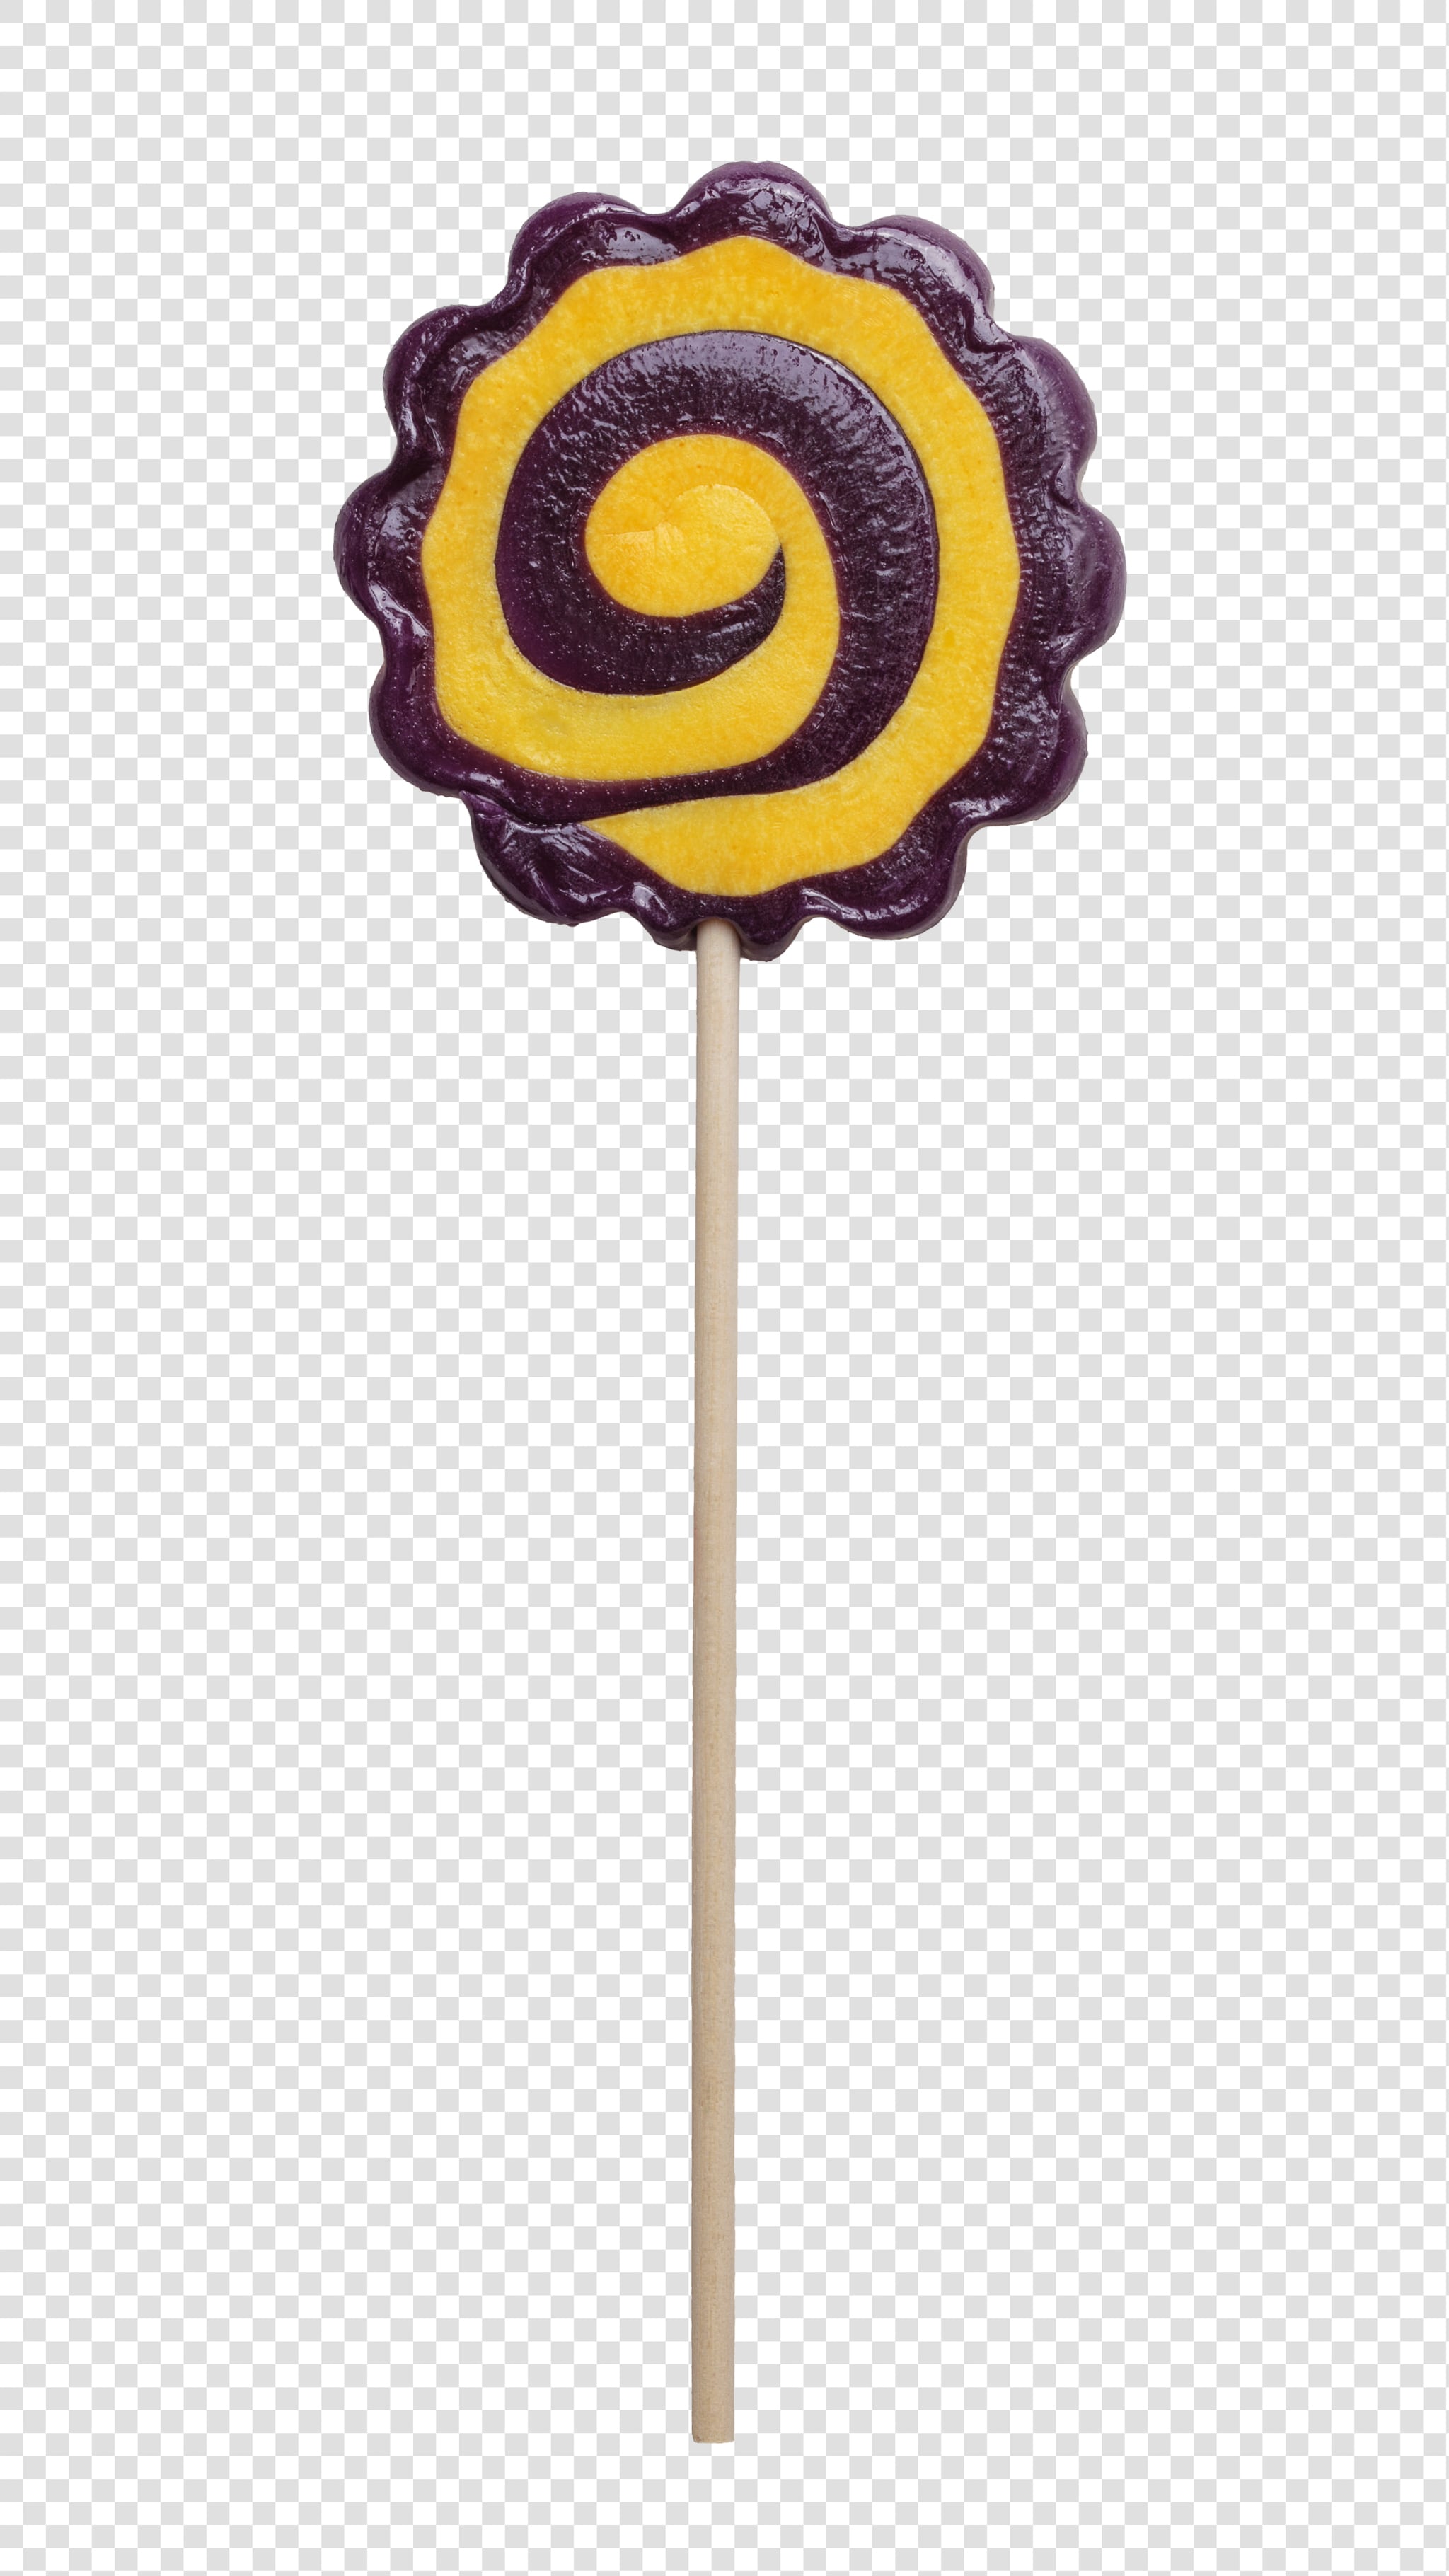 Lollipop PSD isolated image